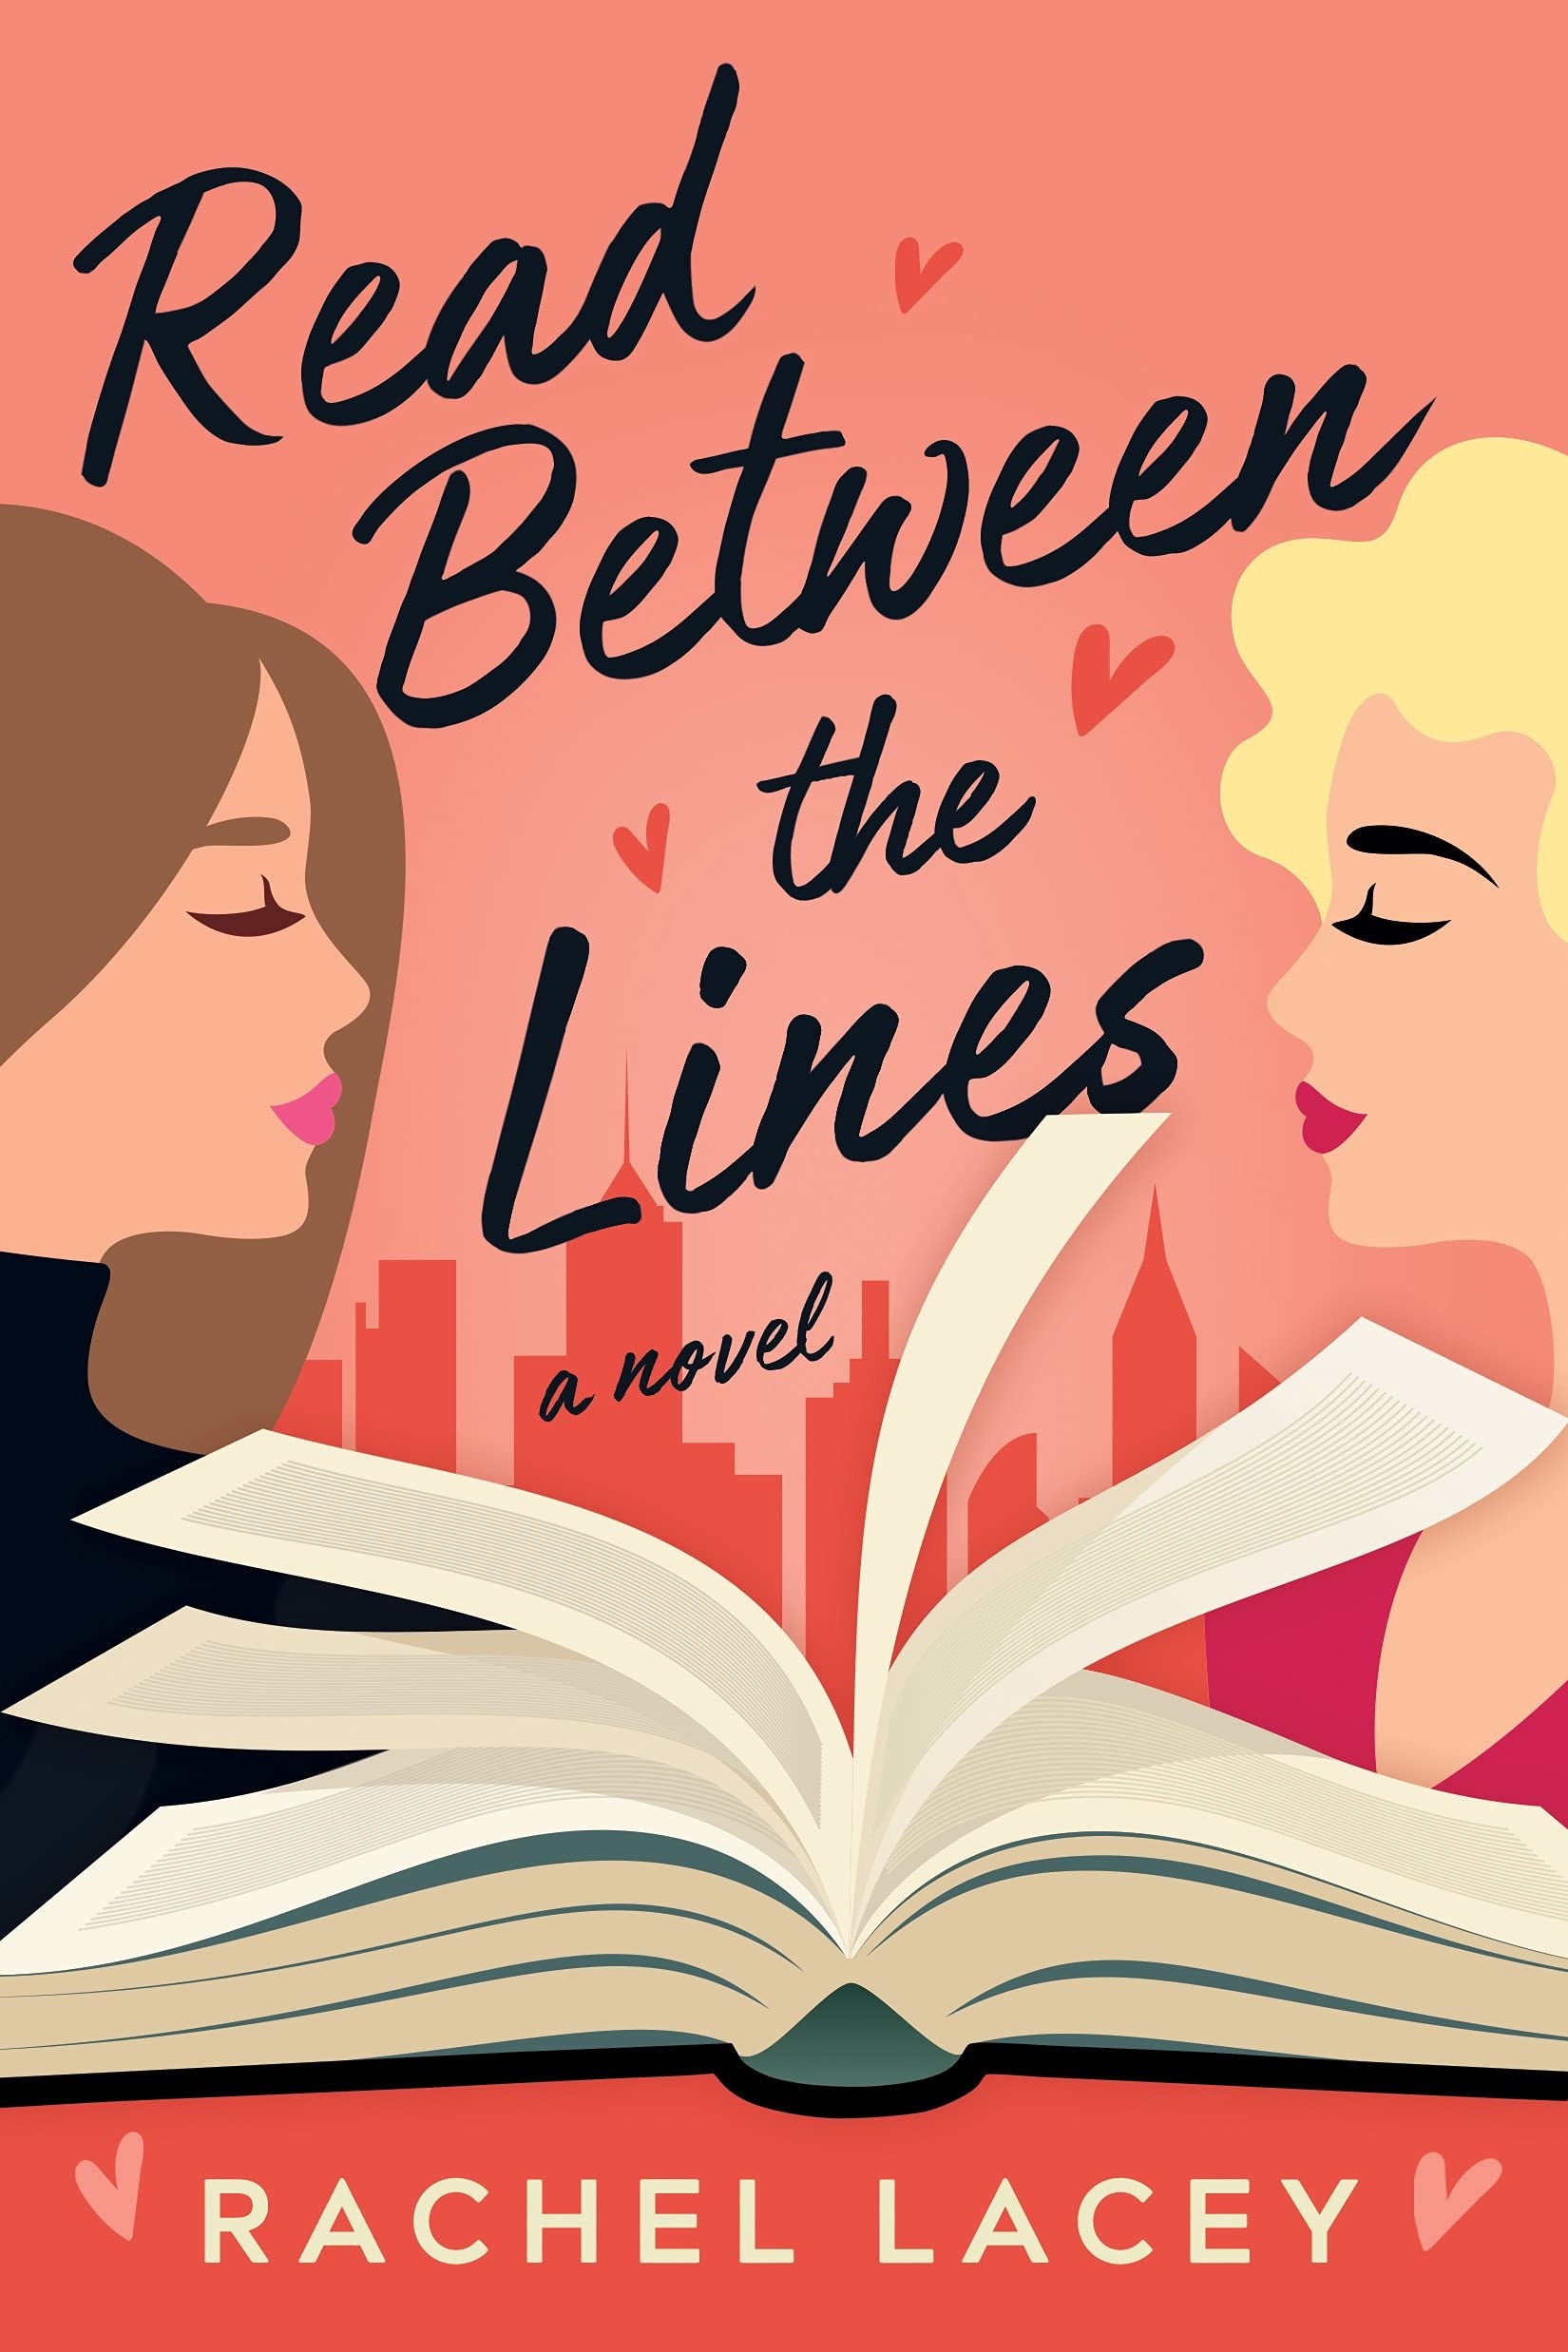 Read Between the Lines cover. Book by Rachel Lacey